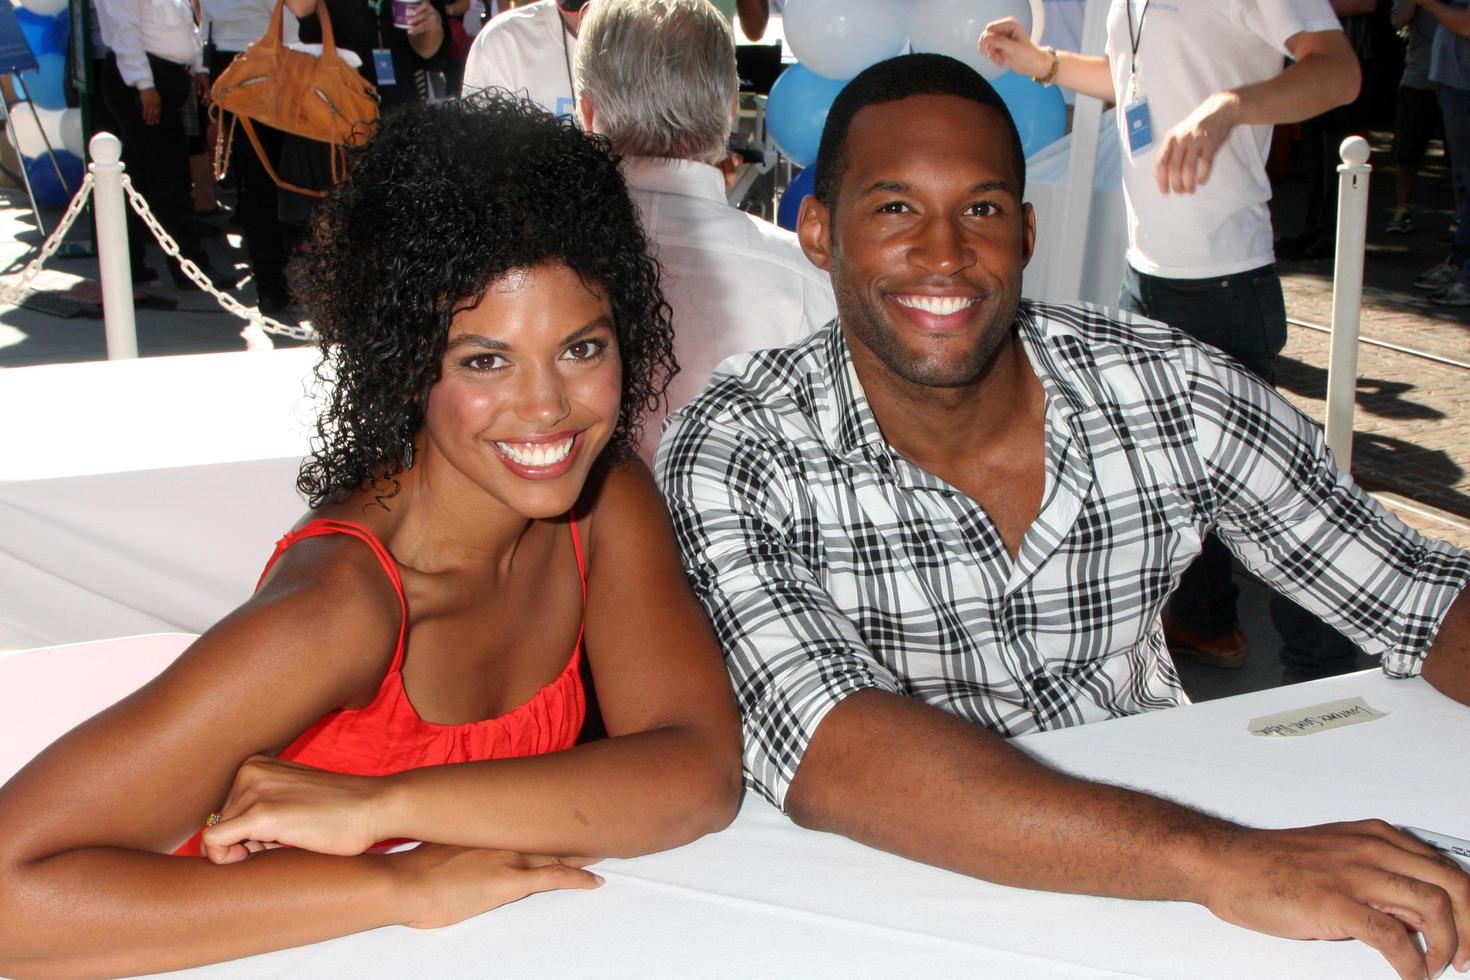 LOS ANGELES, AUG 23 -  Karla Mosley, Lawrence Saint-Victor at the Bold and Beautiful Fan Meet and Greet at the Farmers Market on August 23, 2013 in Los Angeles, CA photo